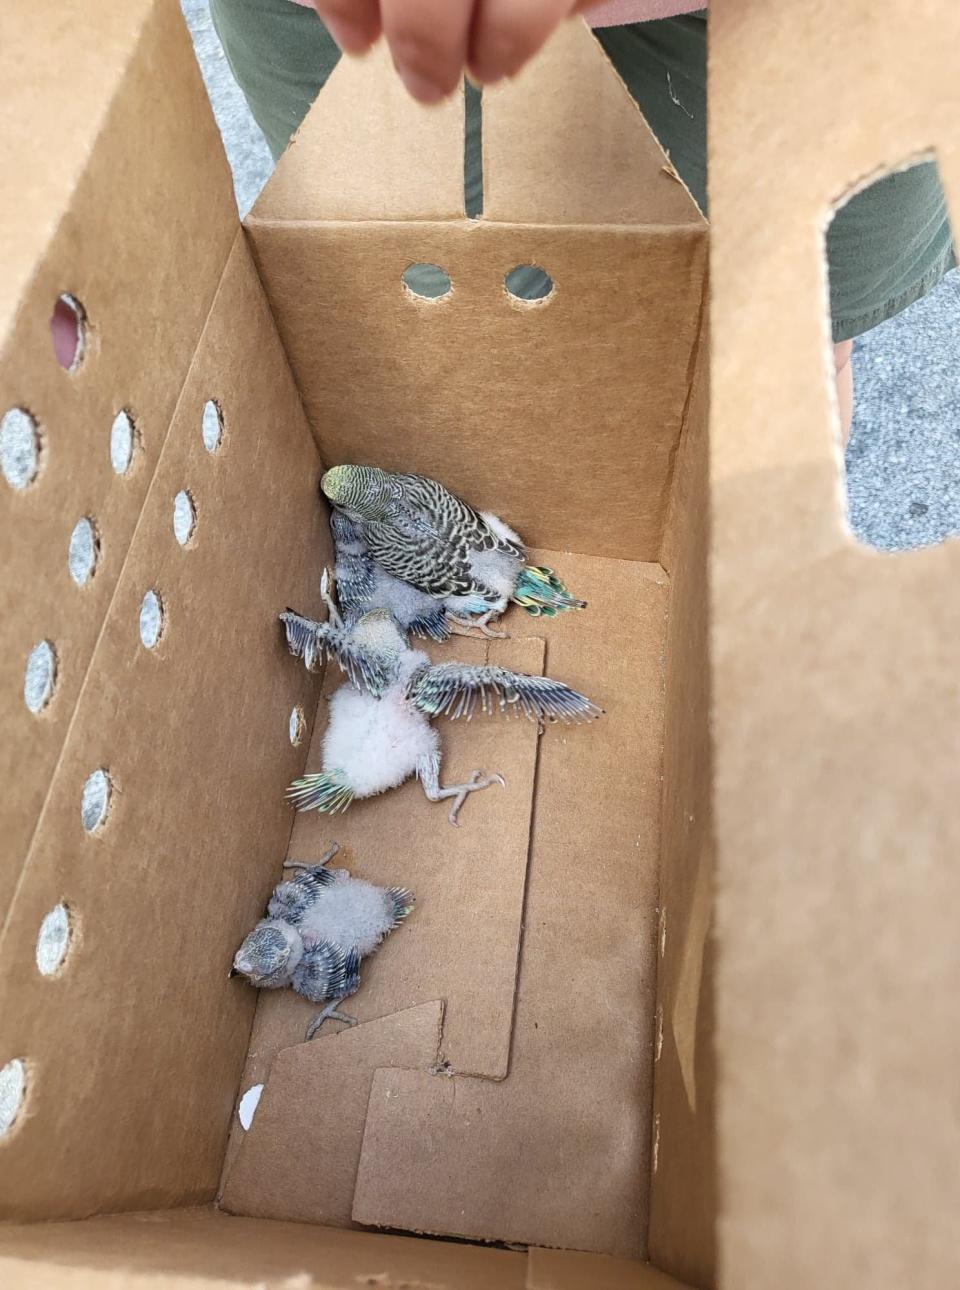 Several baby parakeets were rescued from inside the walls of a Fort Walton Beach home earlier this month. More 160 other birds were left without care after their owner passed away.